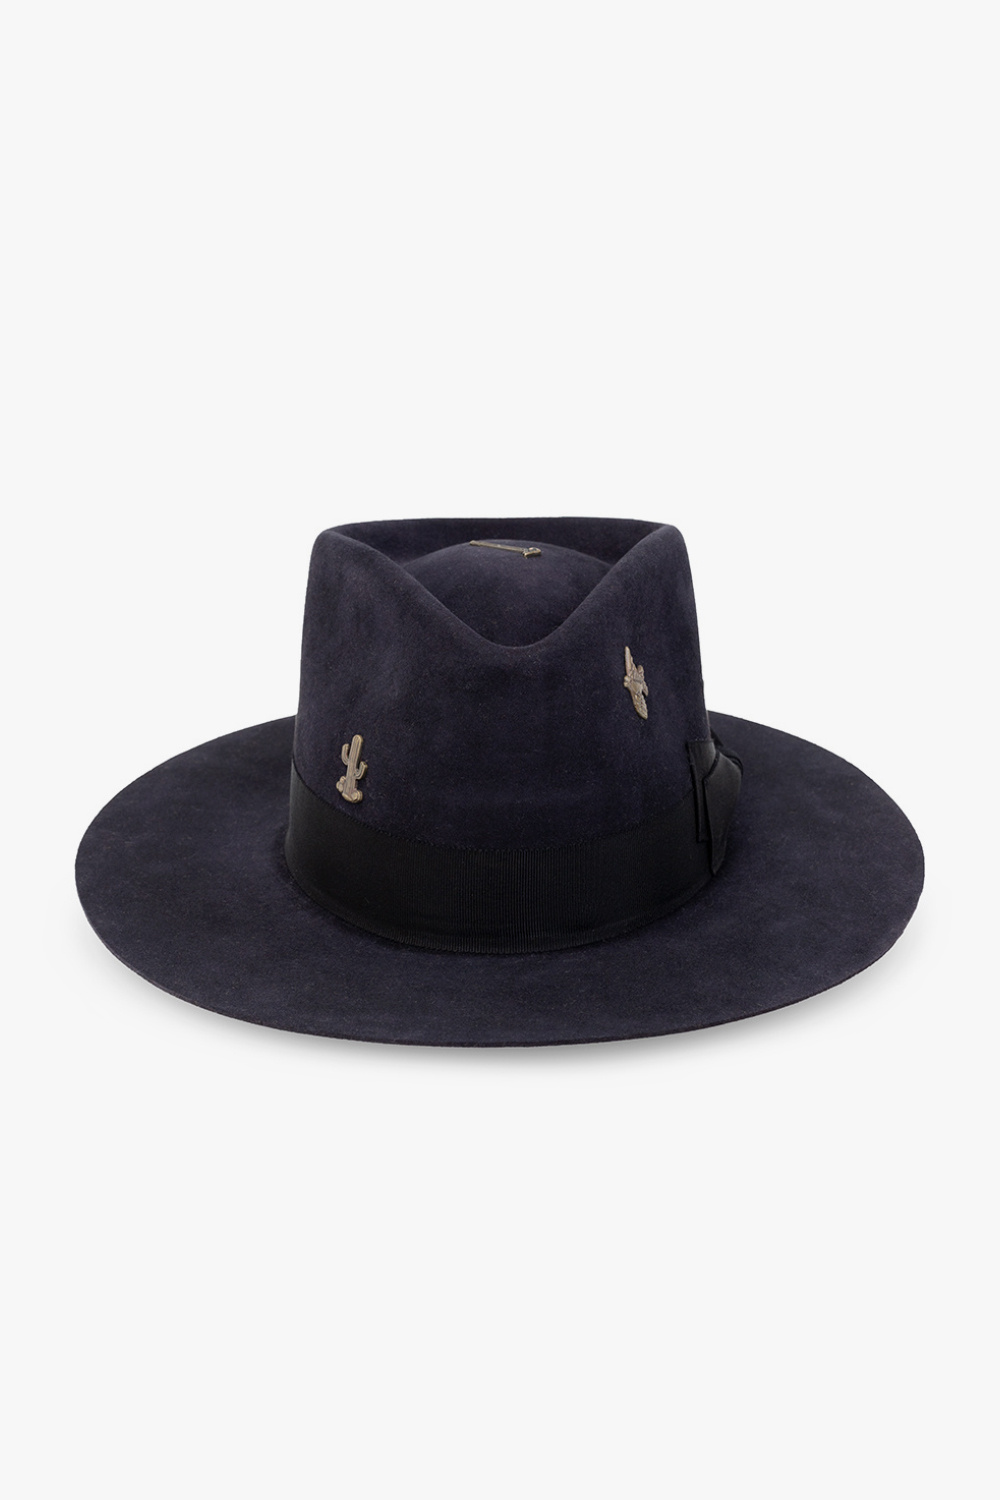 Nick Fouquet ‘Cenote’ hat Clean with bow